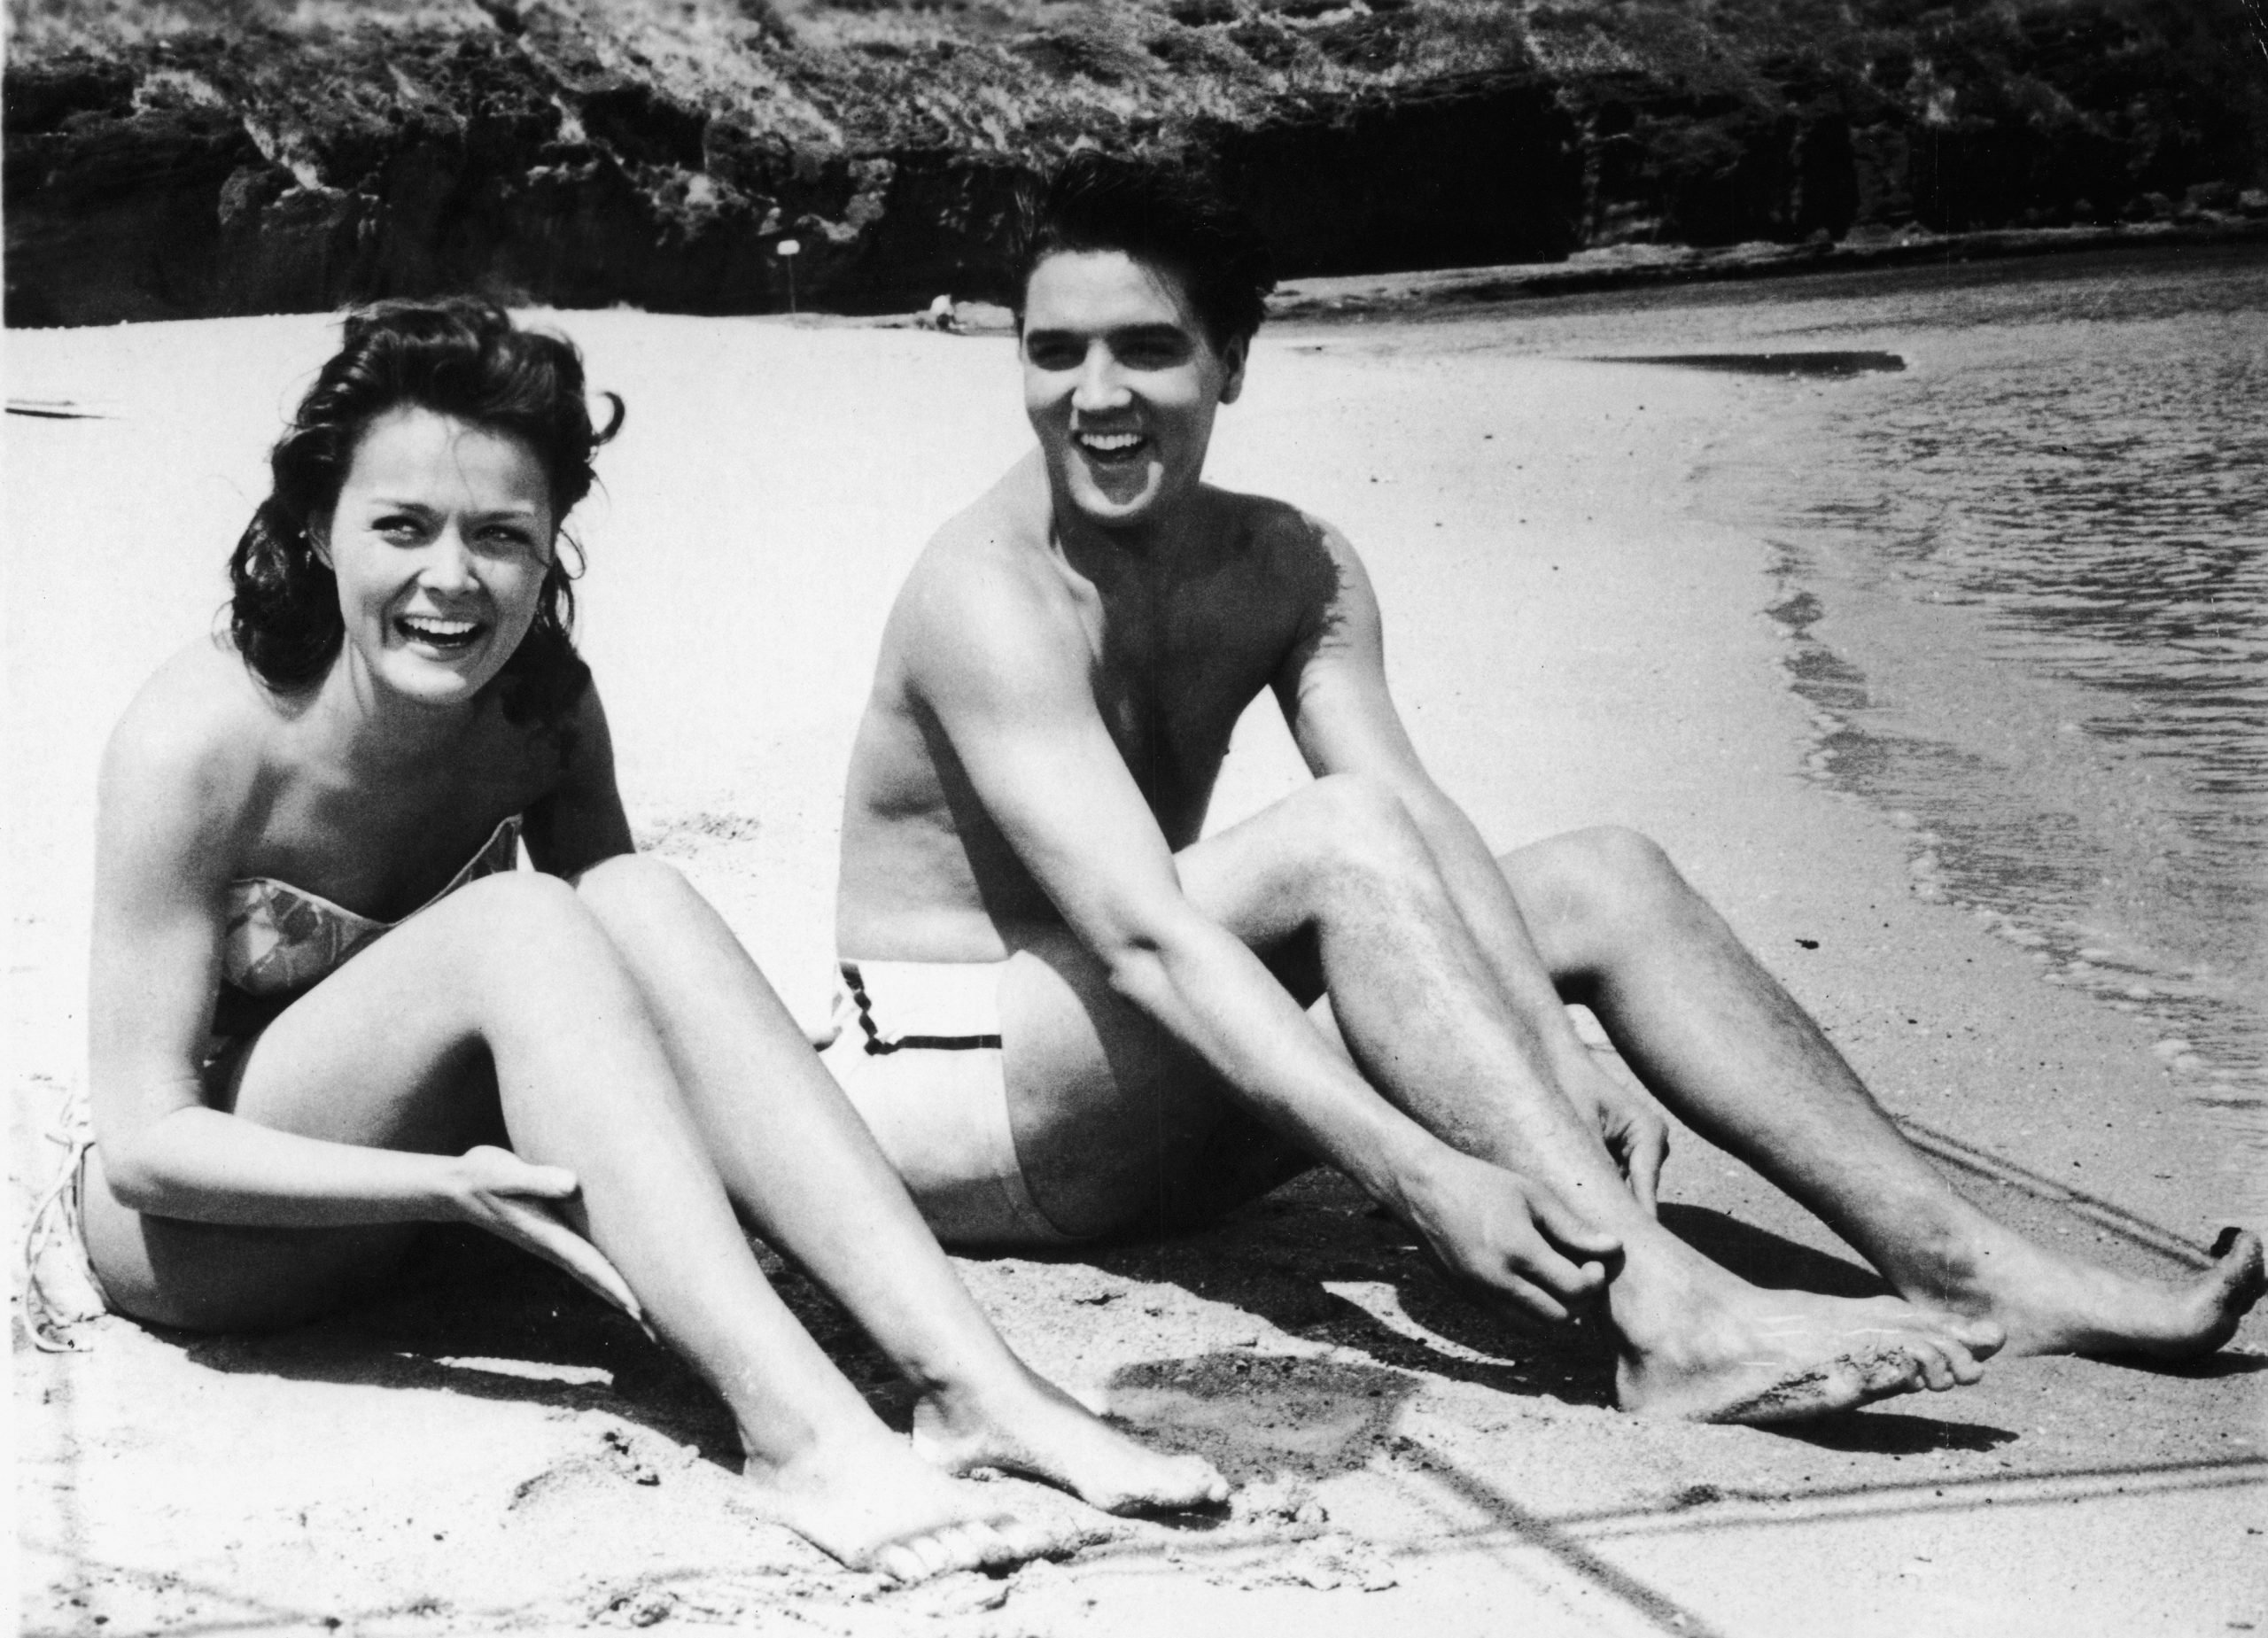 Joan Blackman and Elvis Presley sitting on a beach in a black-and-white image